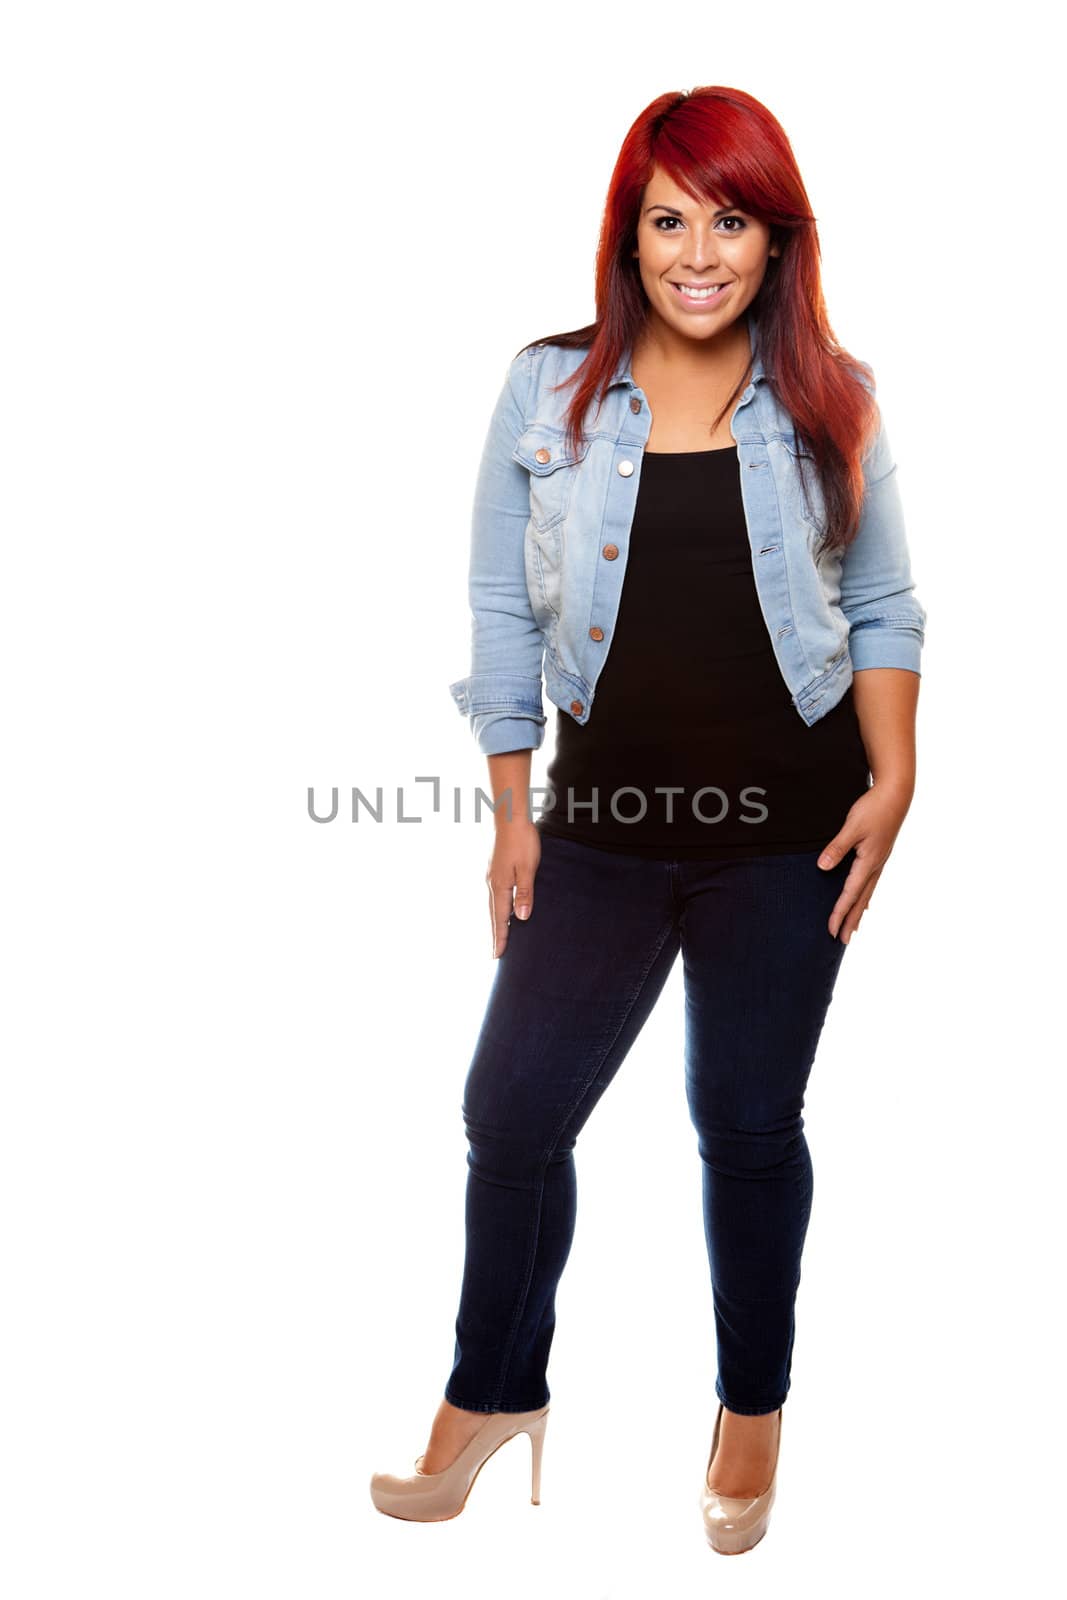 Young woman proudly shows off her physique wearing jeans over a white background.